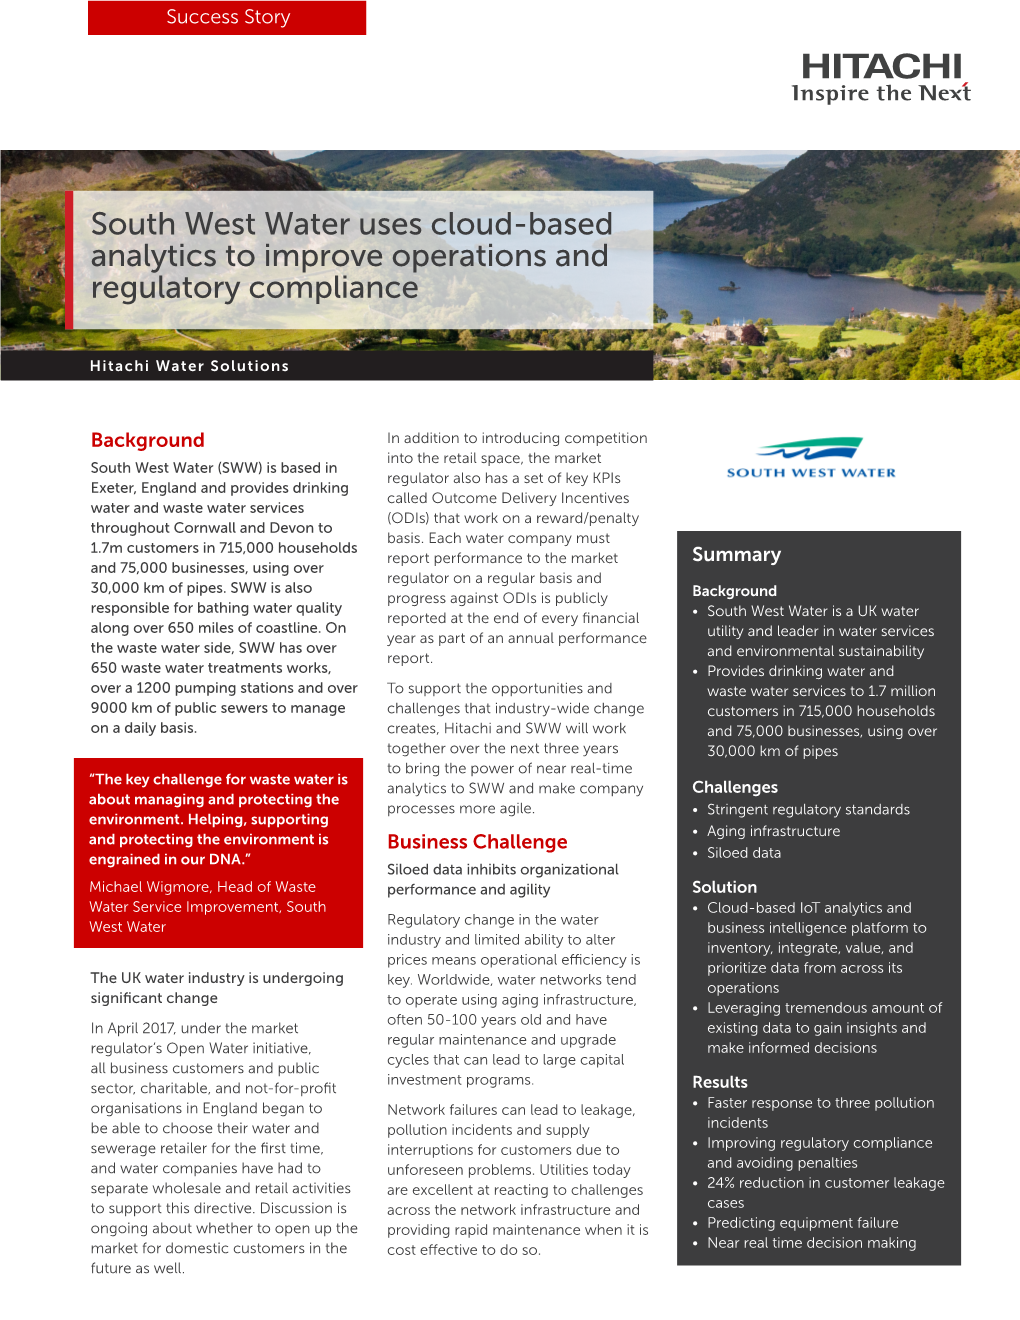 South West Water Uses Cloud-Based Analytics to Improve Operations and Regulatory Compliance